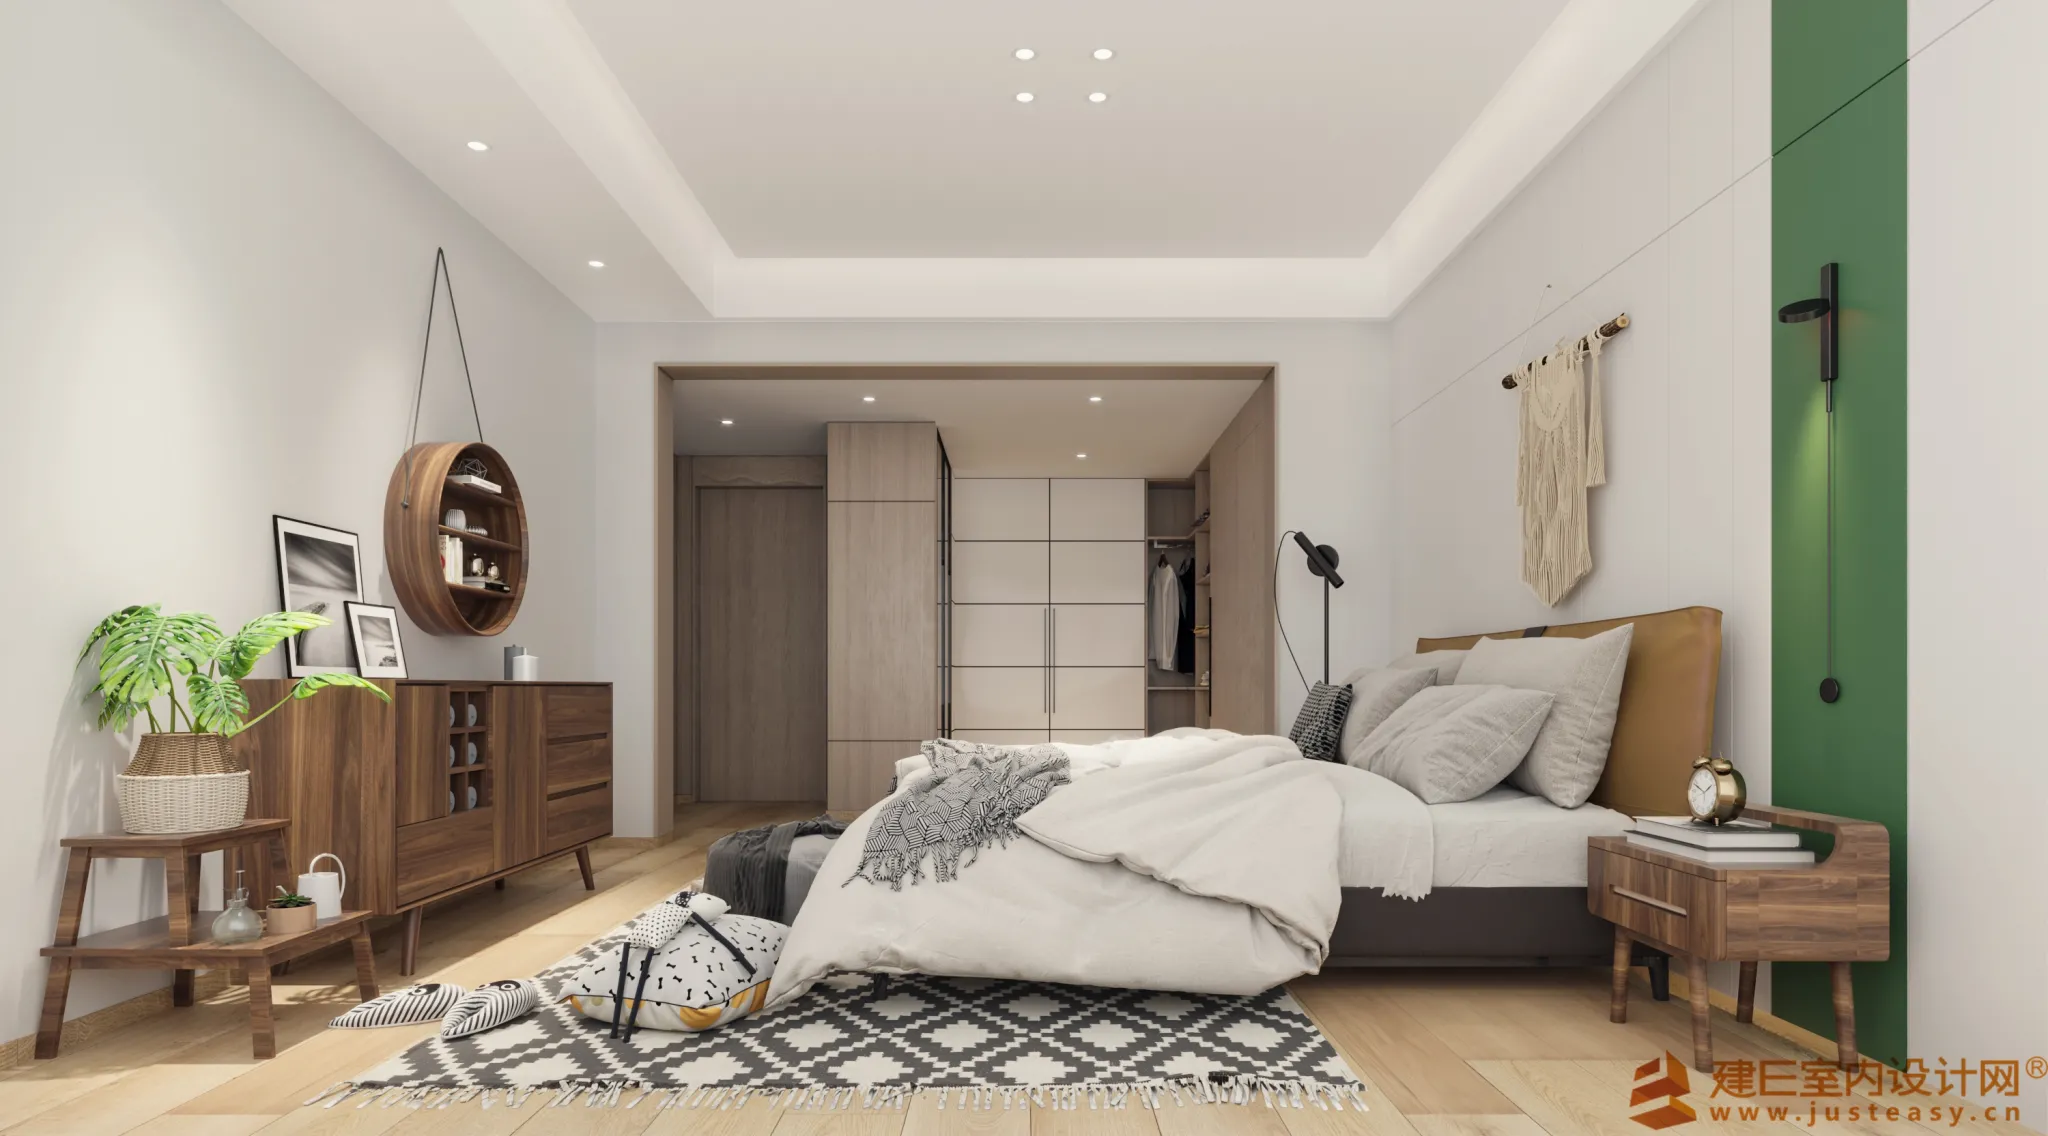 Justeasy 20 – House Space – 03 – BEDROOM – W15